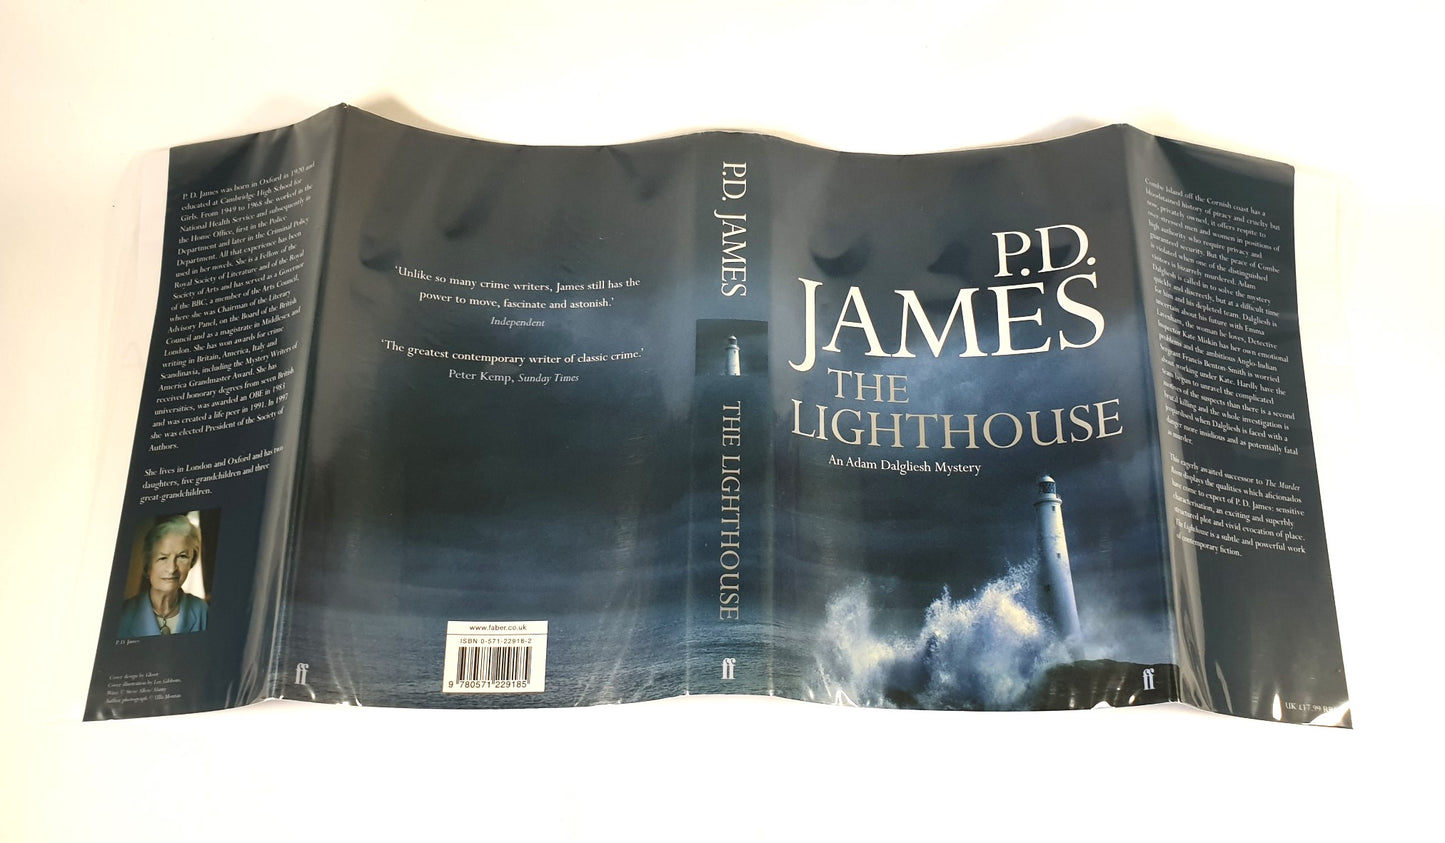 James, P. D. - The Lighthouse (Signed)